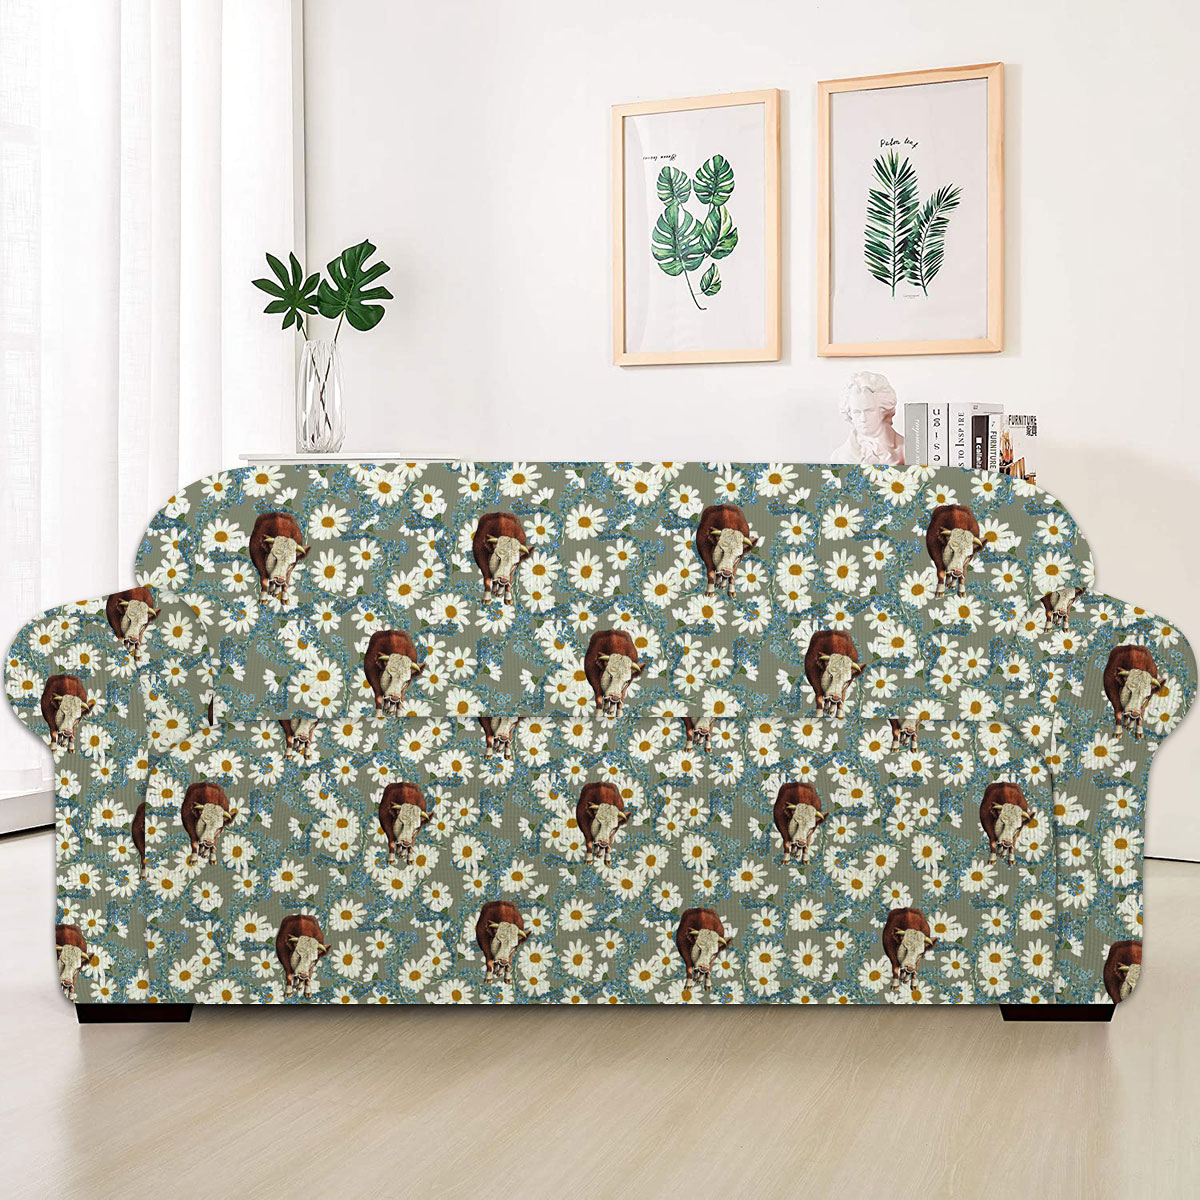 Hereford Camomilles Flower Grey Pattern Sofa Cover